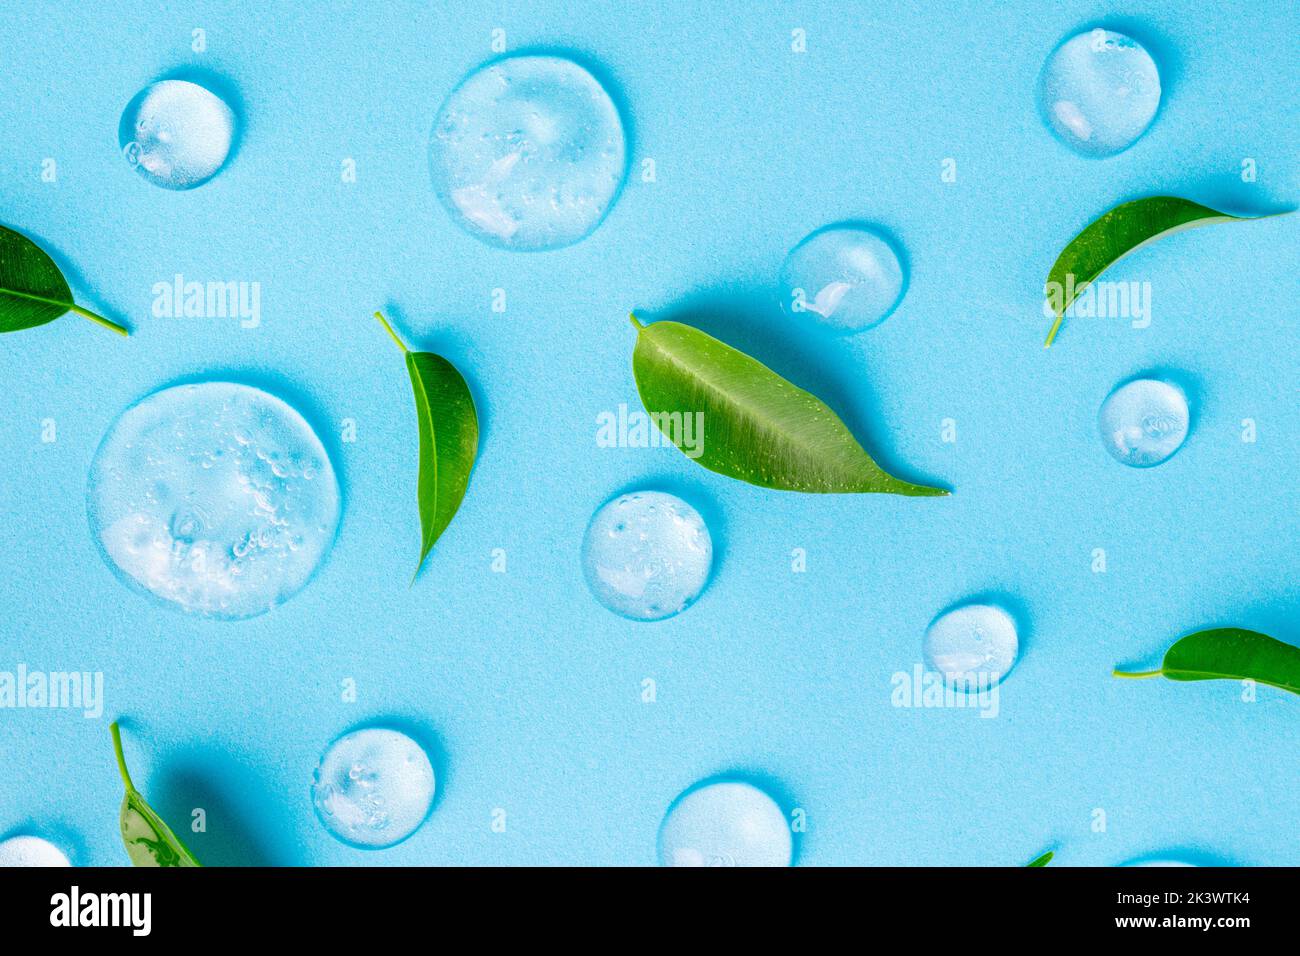 Cosmetics gel and green leaves on blue background. Texture of blue gel or sanitizer. Blue cosmetics gel for face cleansing. Moisturizing, beauty produ Stock Photo